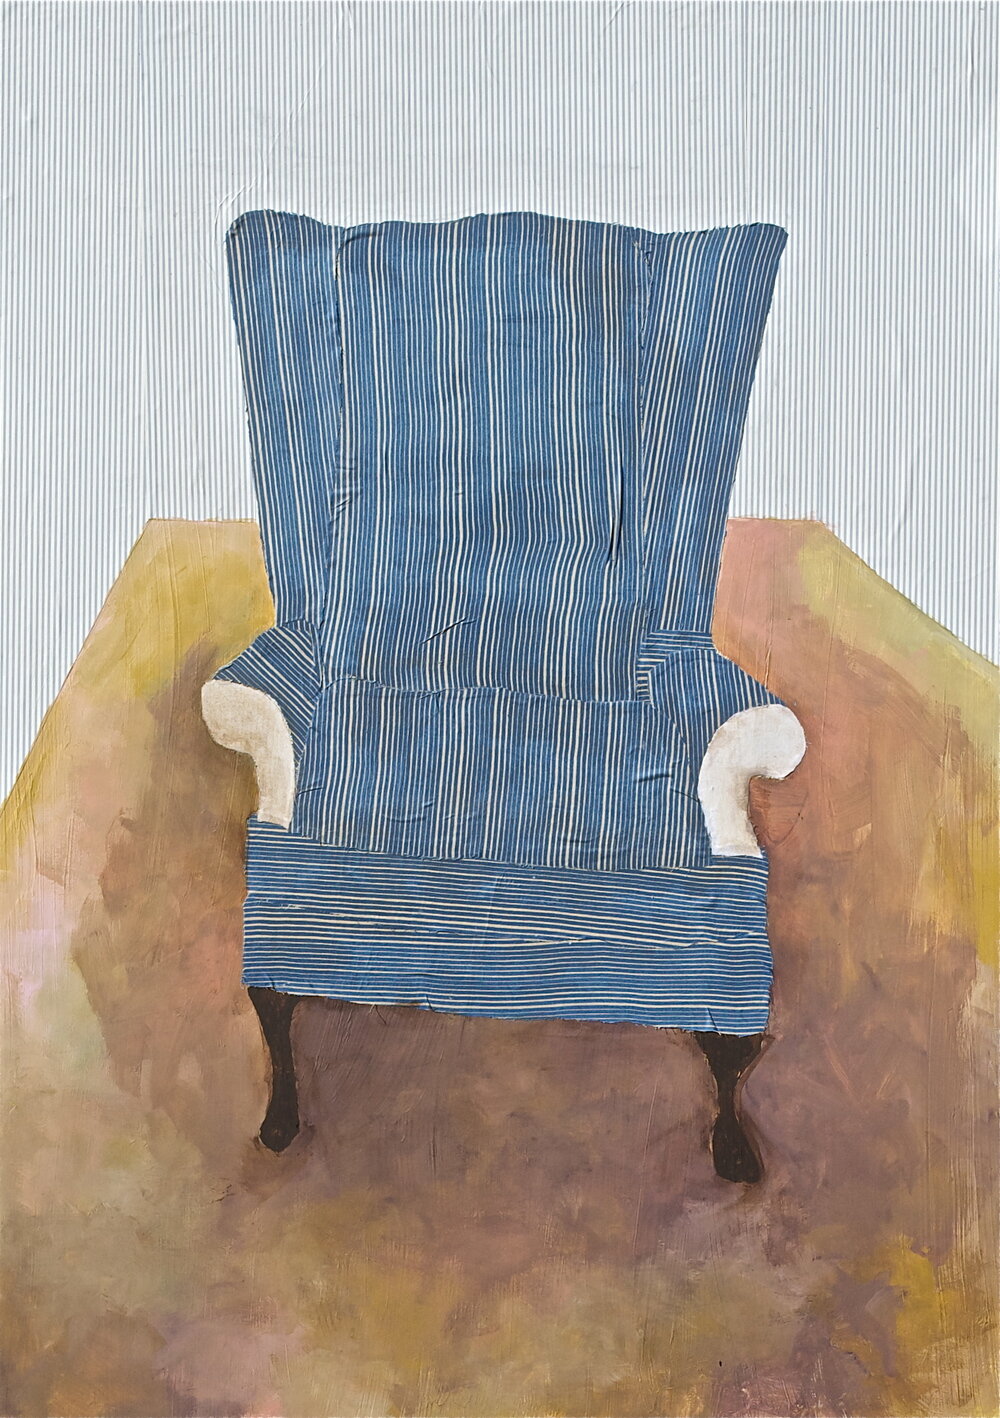   Portrait of a Painted Chair,  2011, Acrylic, wallpaper and fabric on panel, 48 x 34 inches 